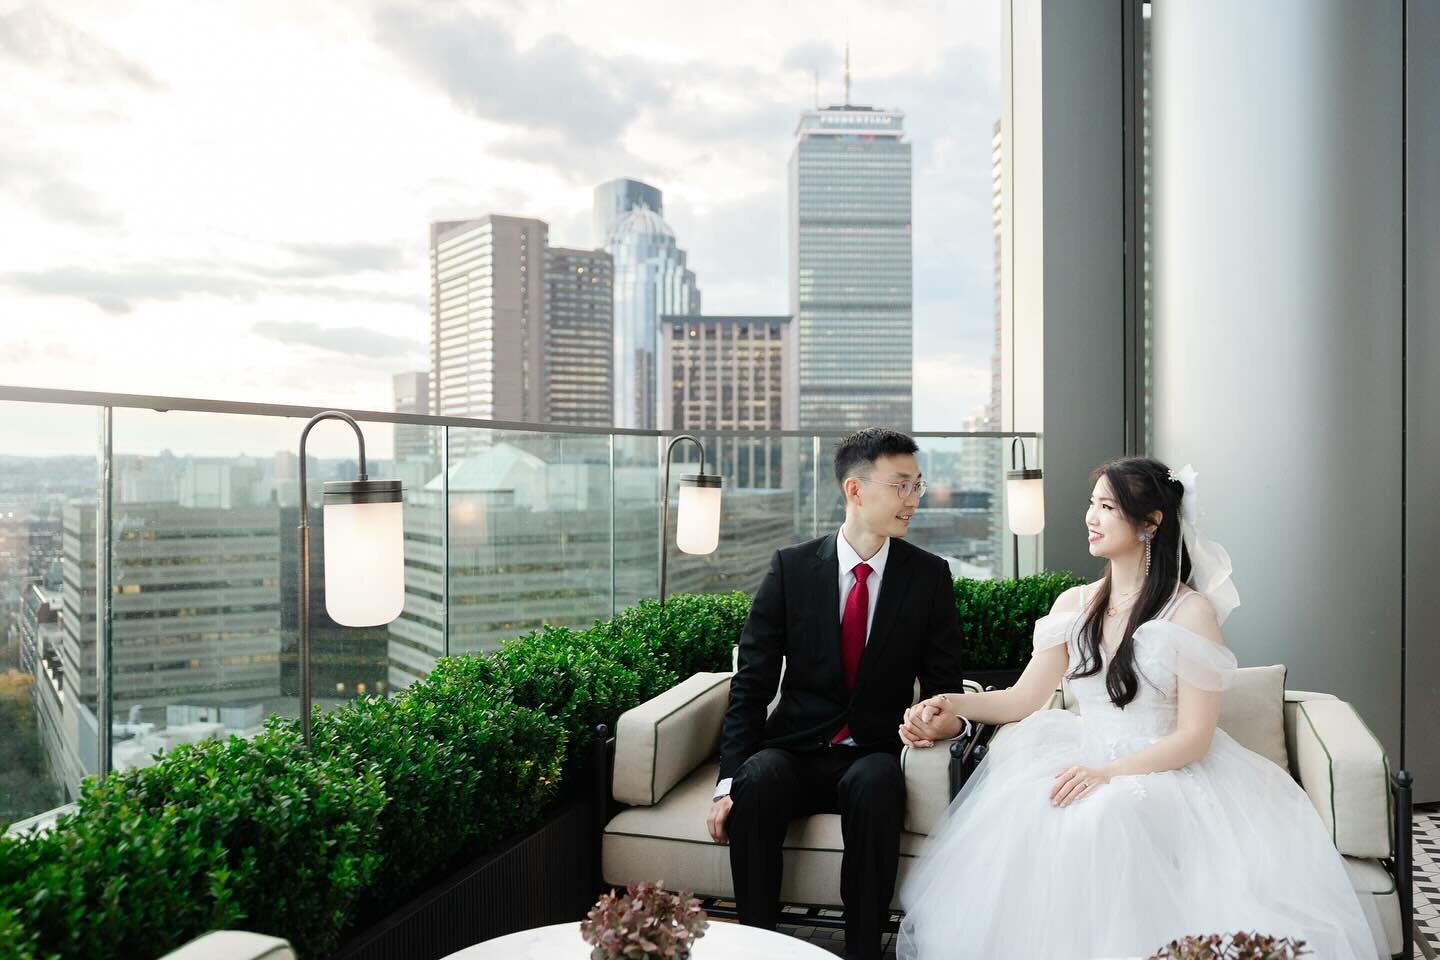 🚨New venue alert! 🚨 We caught an incredible view during sunset on the roof deck at the stunning brand new @rafflesboston in Back Bay 🌇
.
.
.
.
.
#bostonweddingphotography #bostonweddingphotographer #bostonwedding #raffles #rafflesboston #rafflesbo